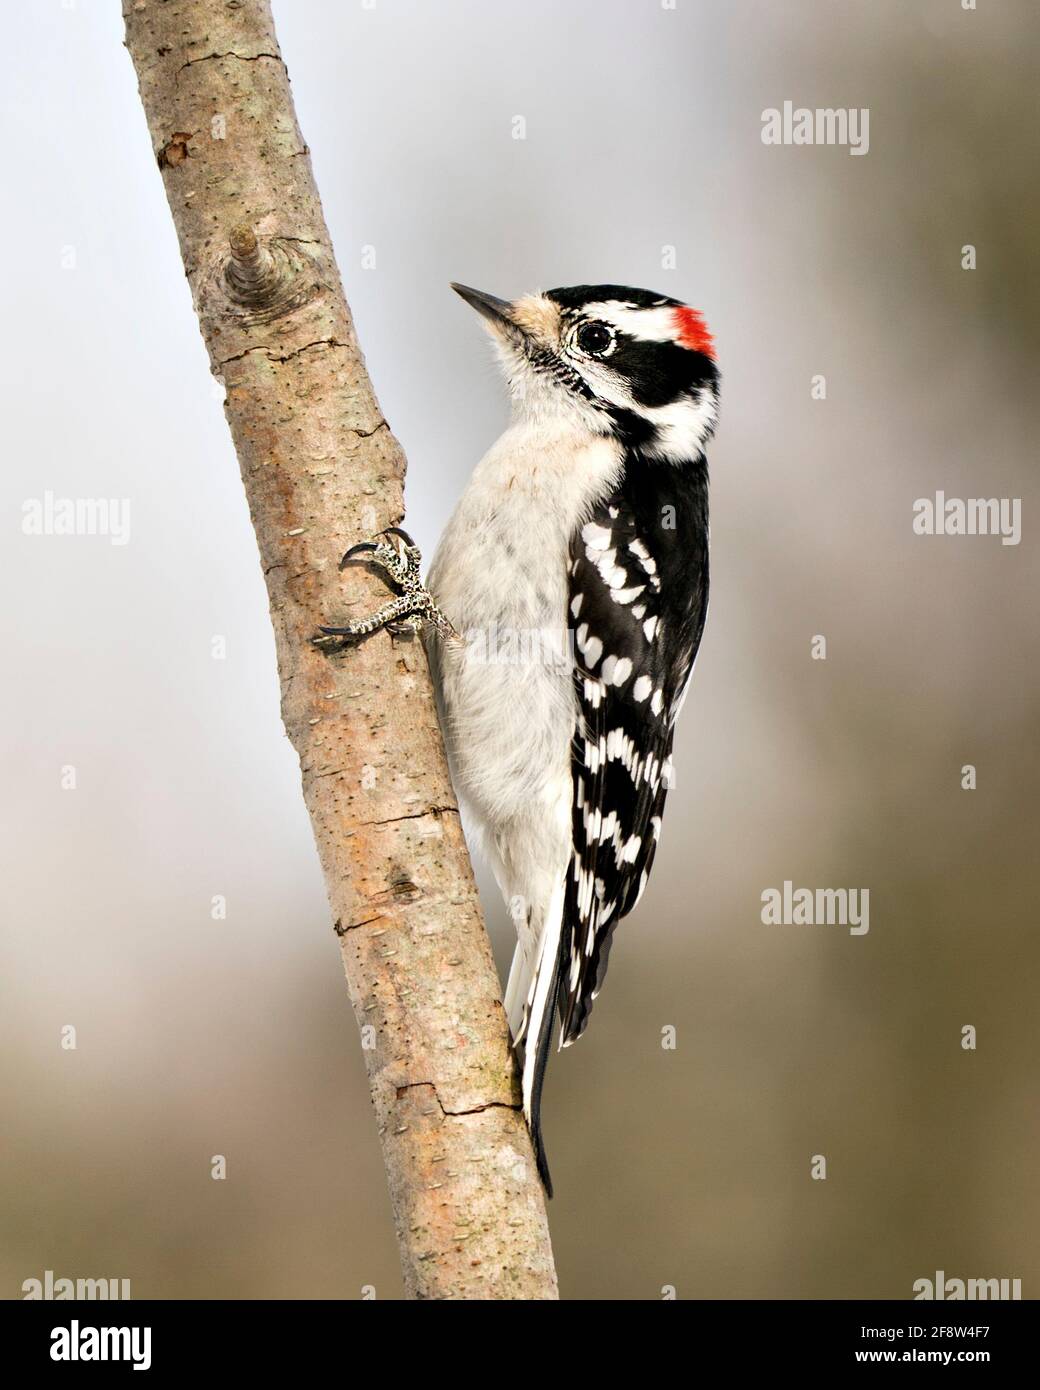 Woodpecker male close-up image climbing tree branch and displaying feather plumage in its environment and habitat in the forest with a blur background Stock Photo